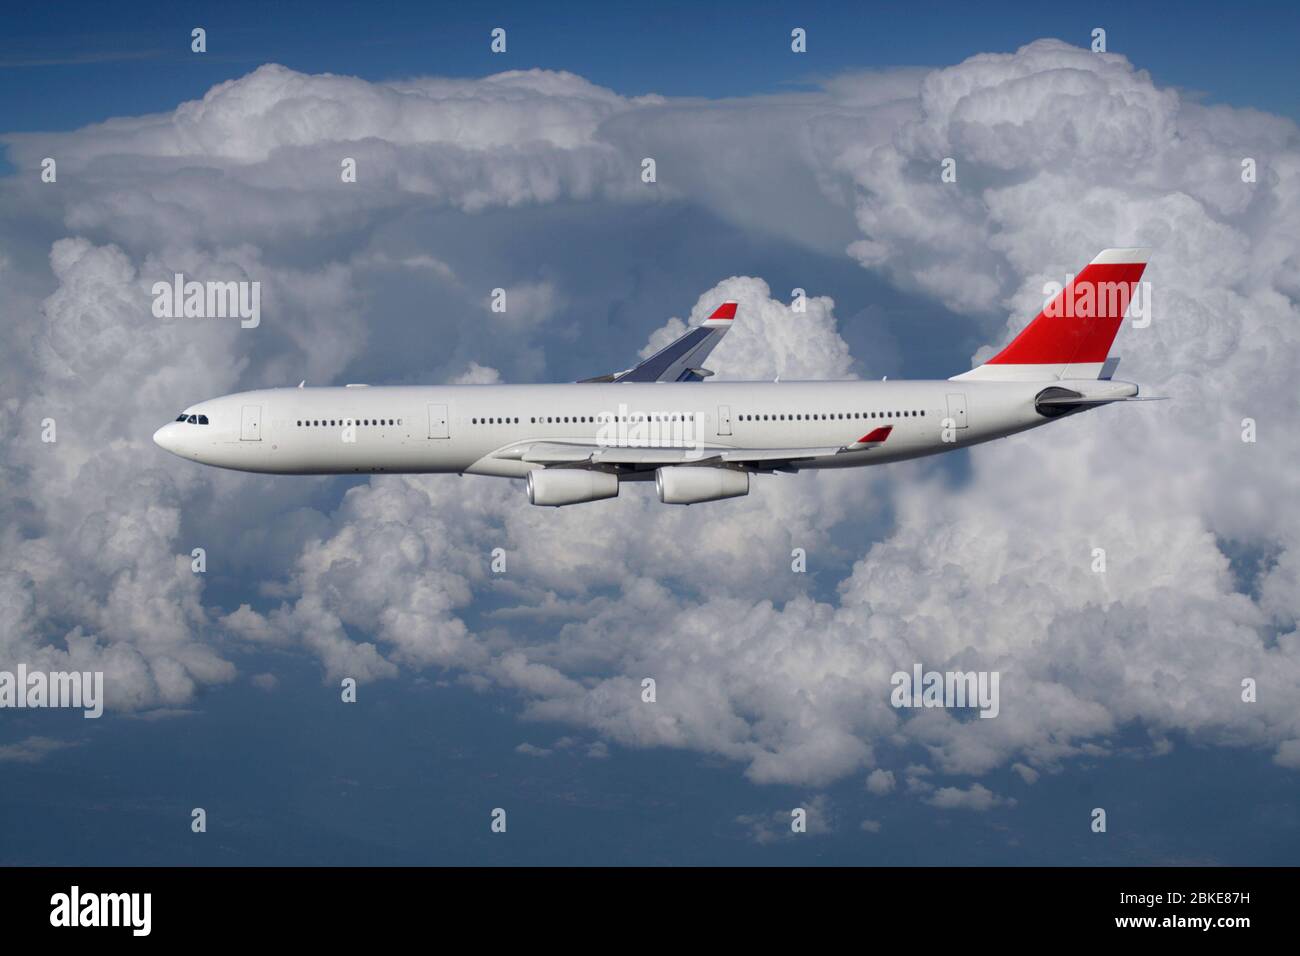 Air travel. Long haul passenger jet plane flying in the air at high altitude against a cloudy sky on a commercial flight. Airplanes and flights. Stock Photo